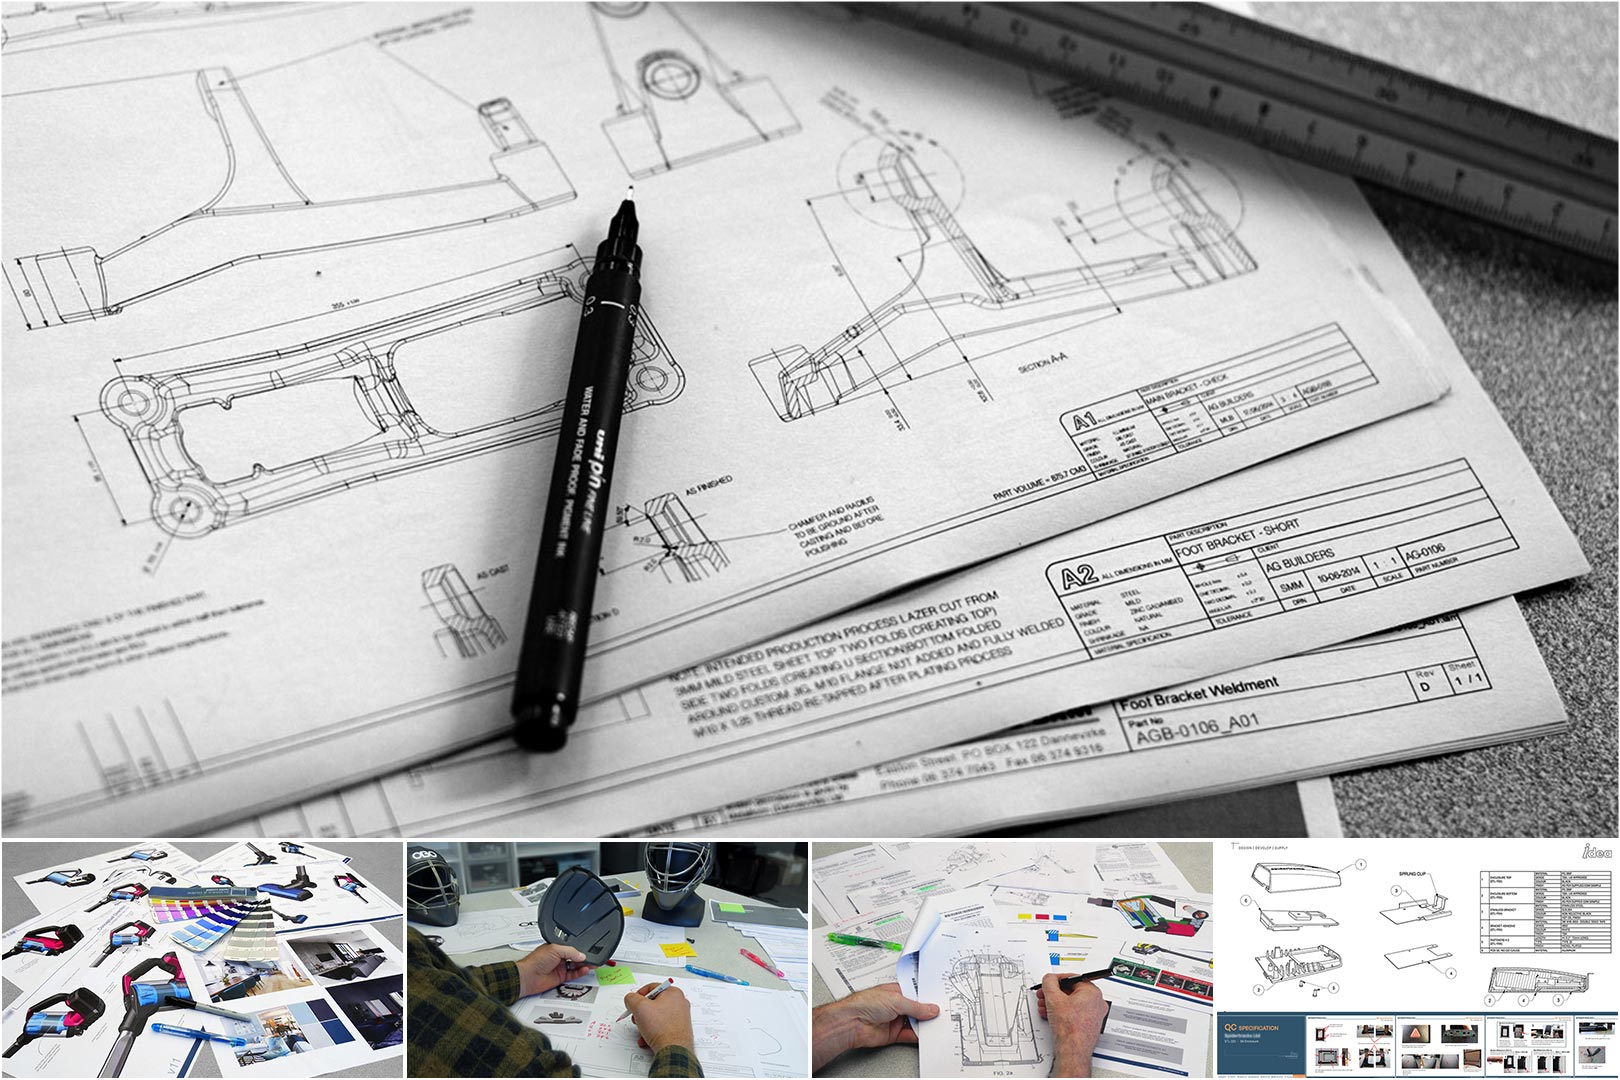 Design drawings and quality control documents